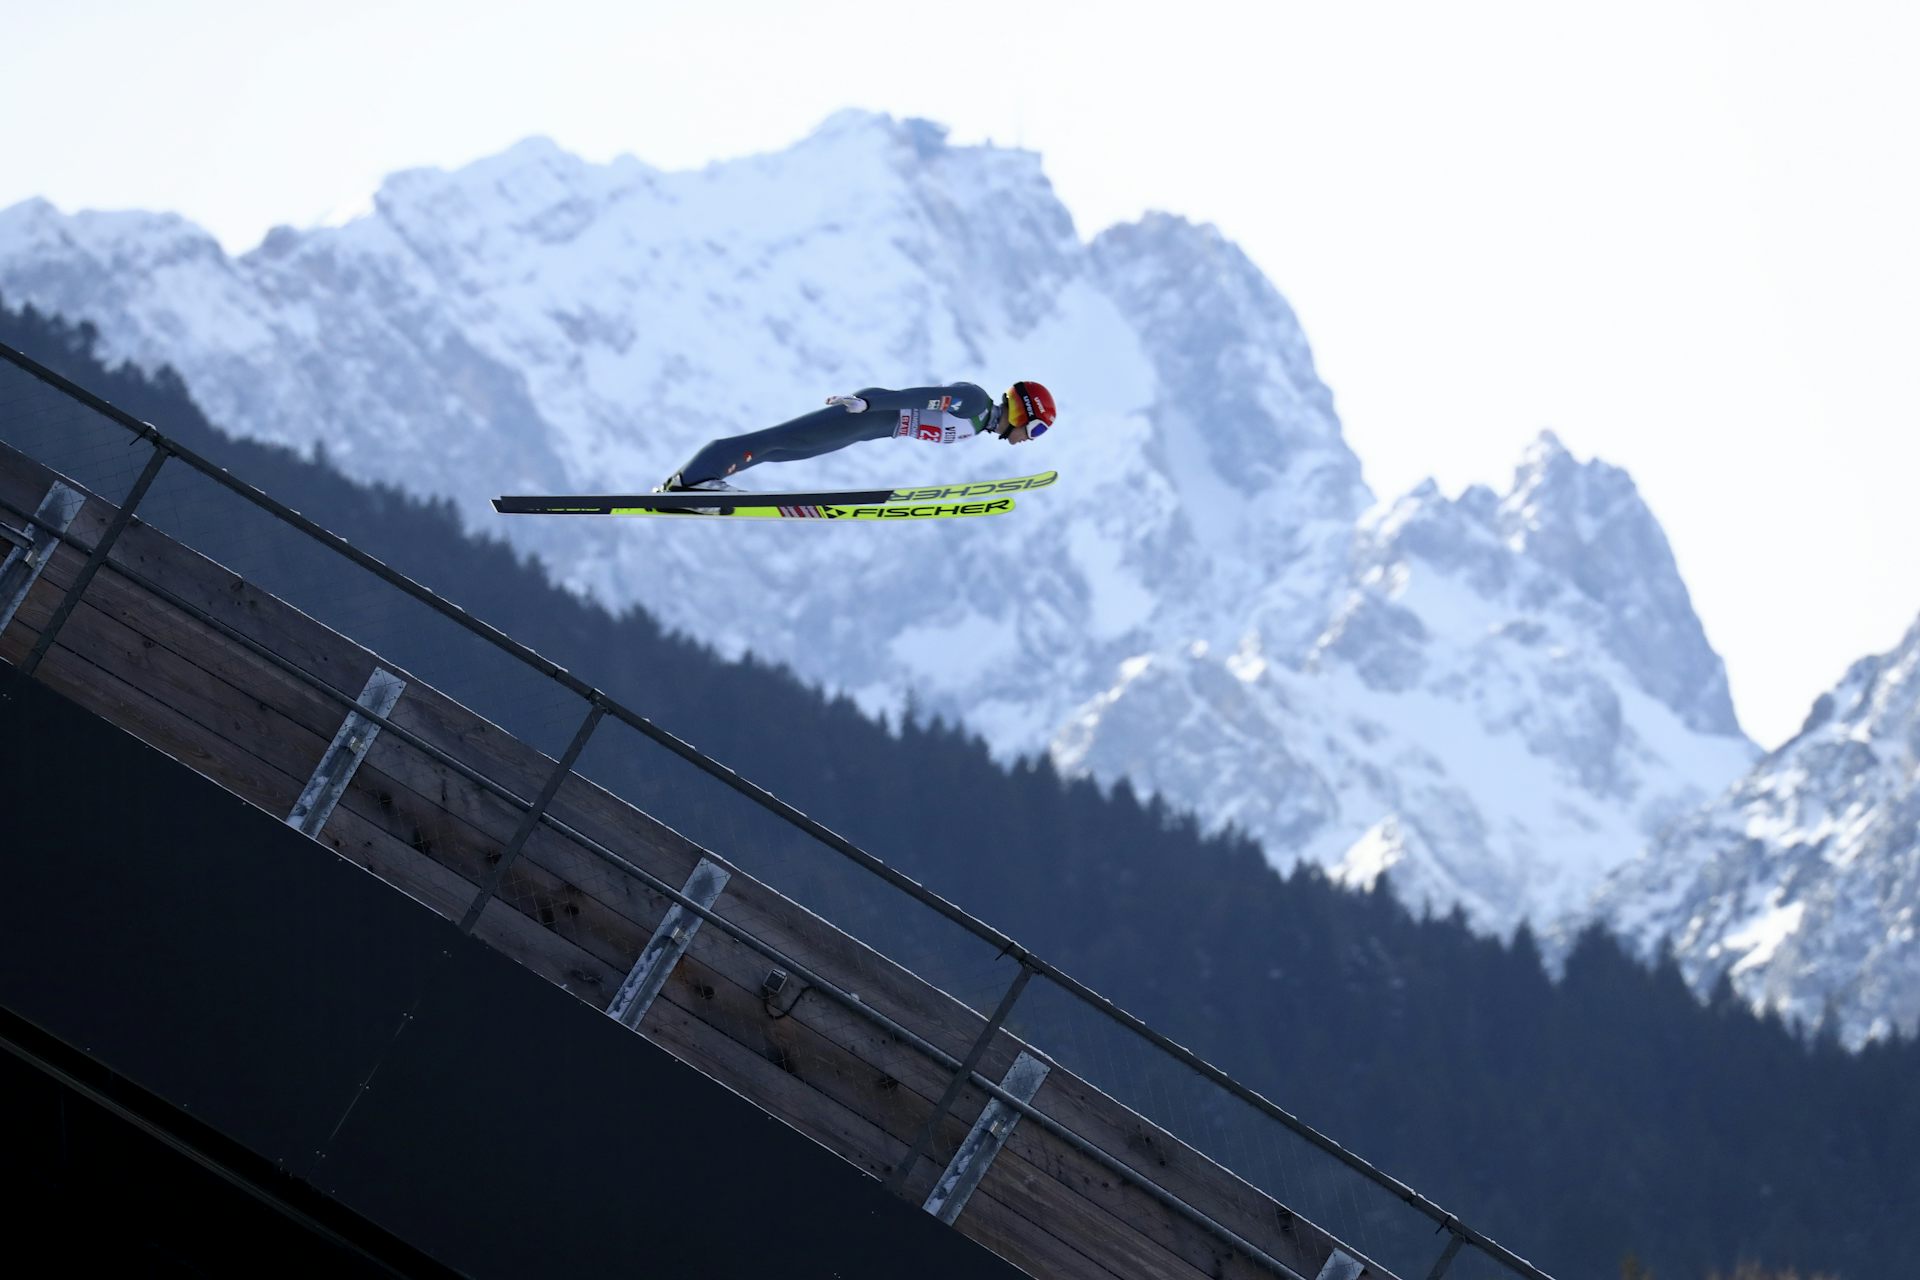 Ski jump Flying or falling with style?